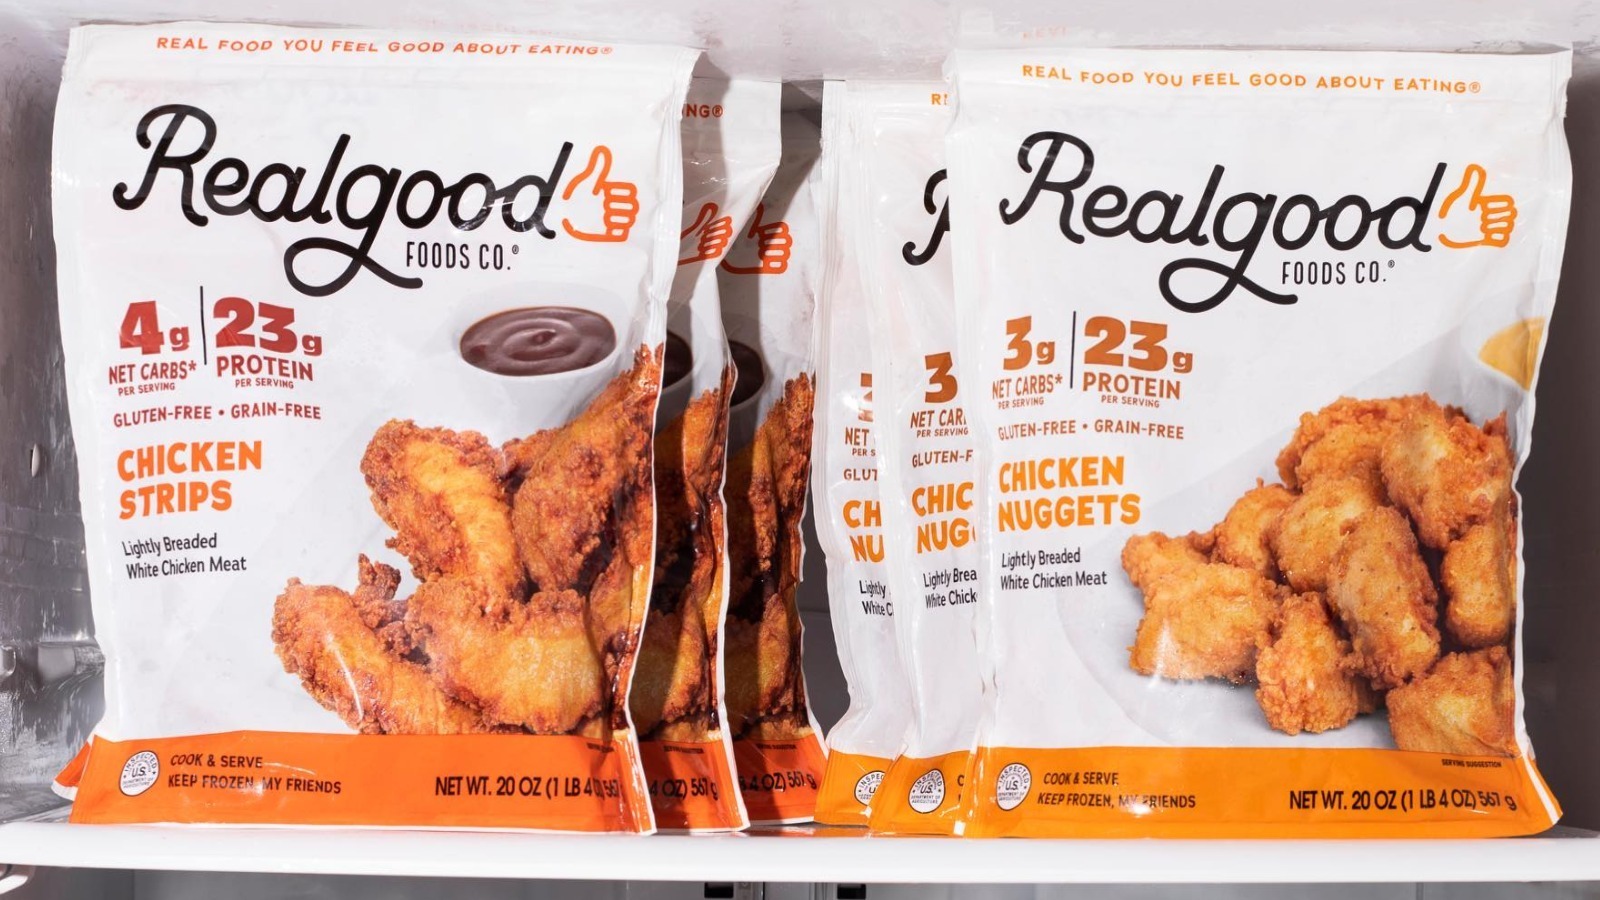 How Real Good Foods Wants To Stand Out With Its New Breaded Chicken Fryer Tuck Chicken